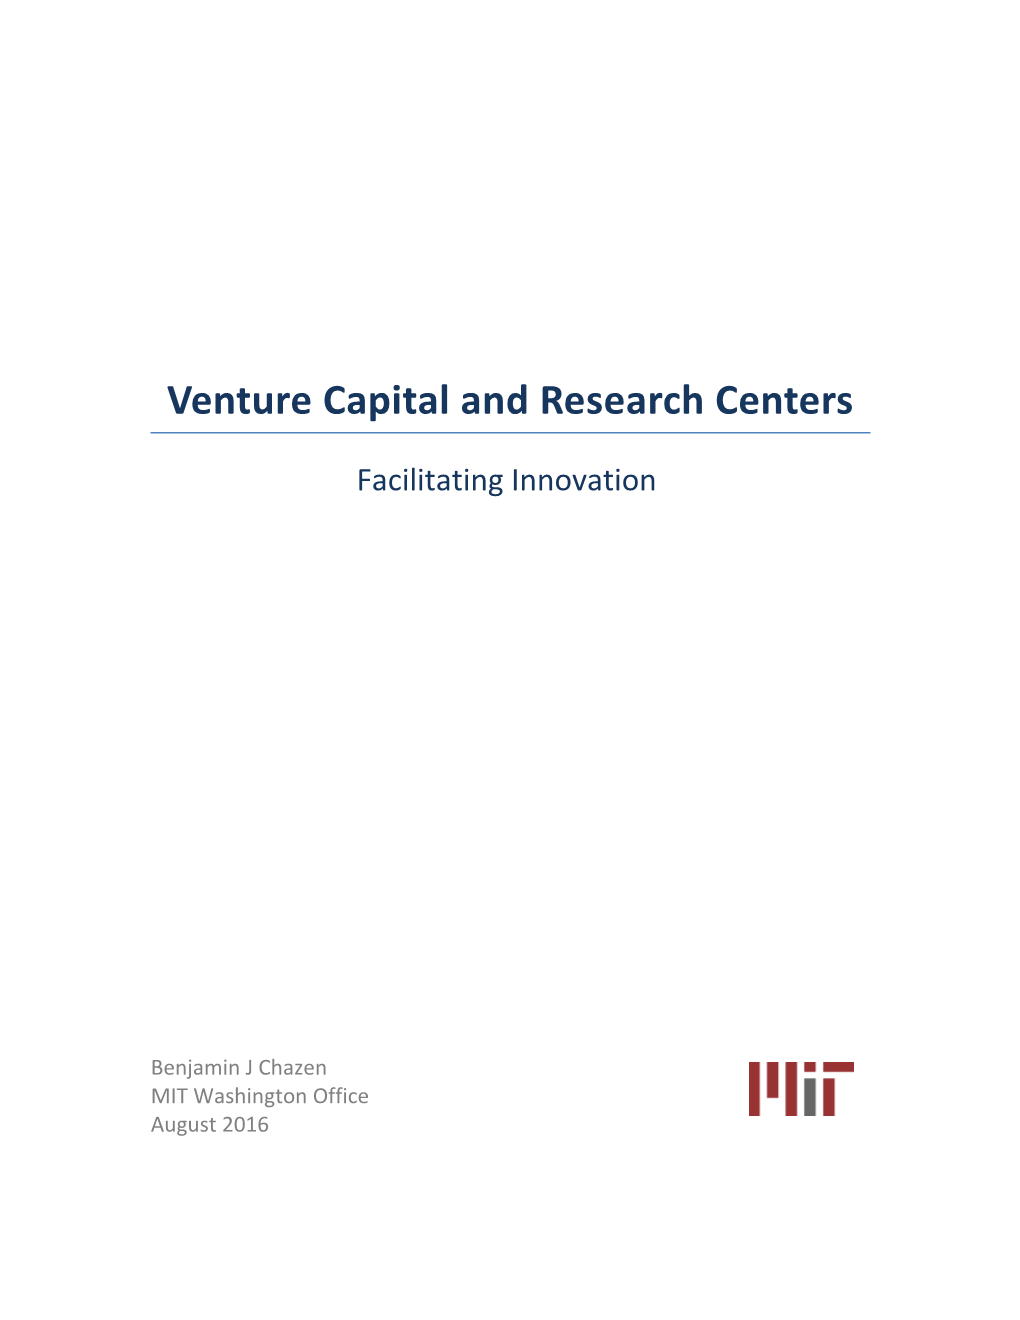 Venture Capital and Research Centers: Facilitating Innovation